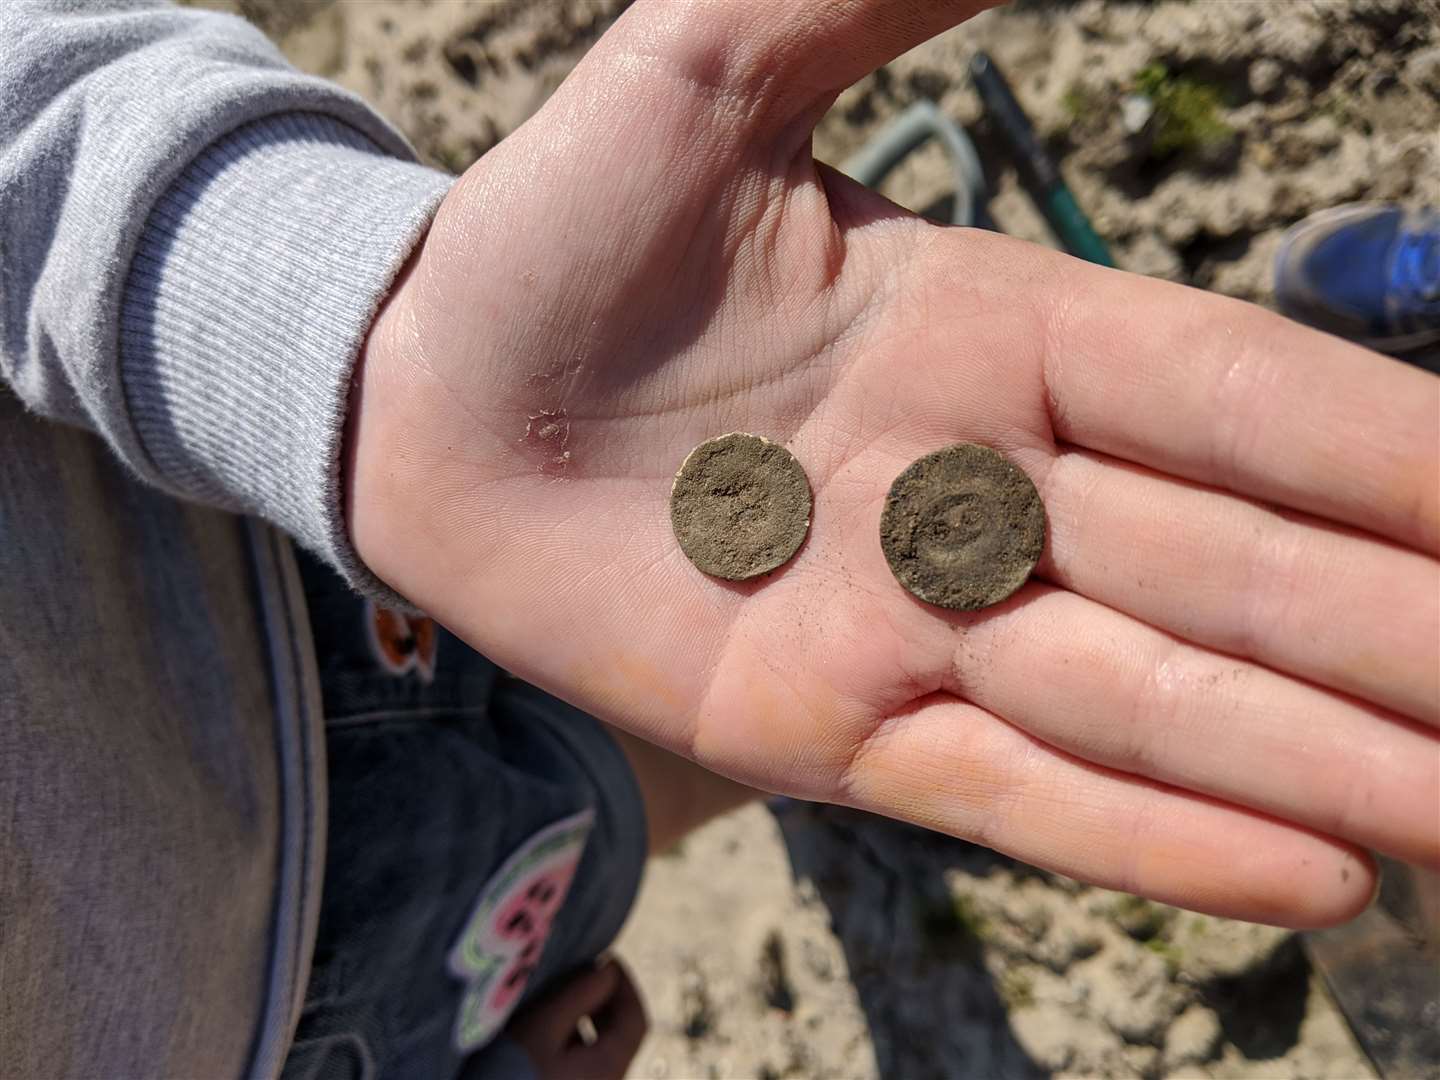 Some of the coins from Ellie's hunt